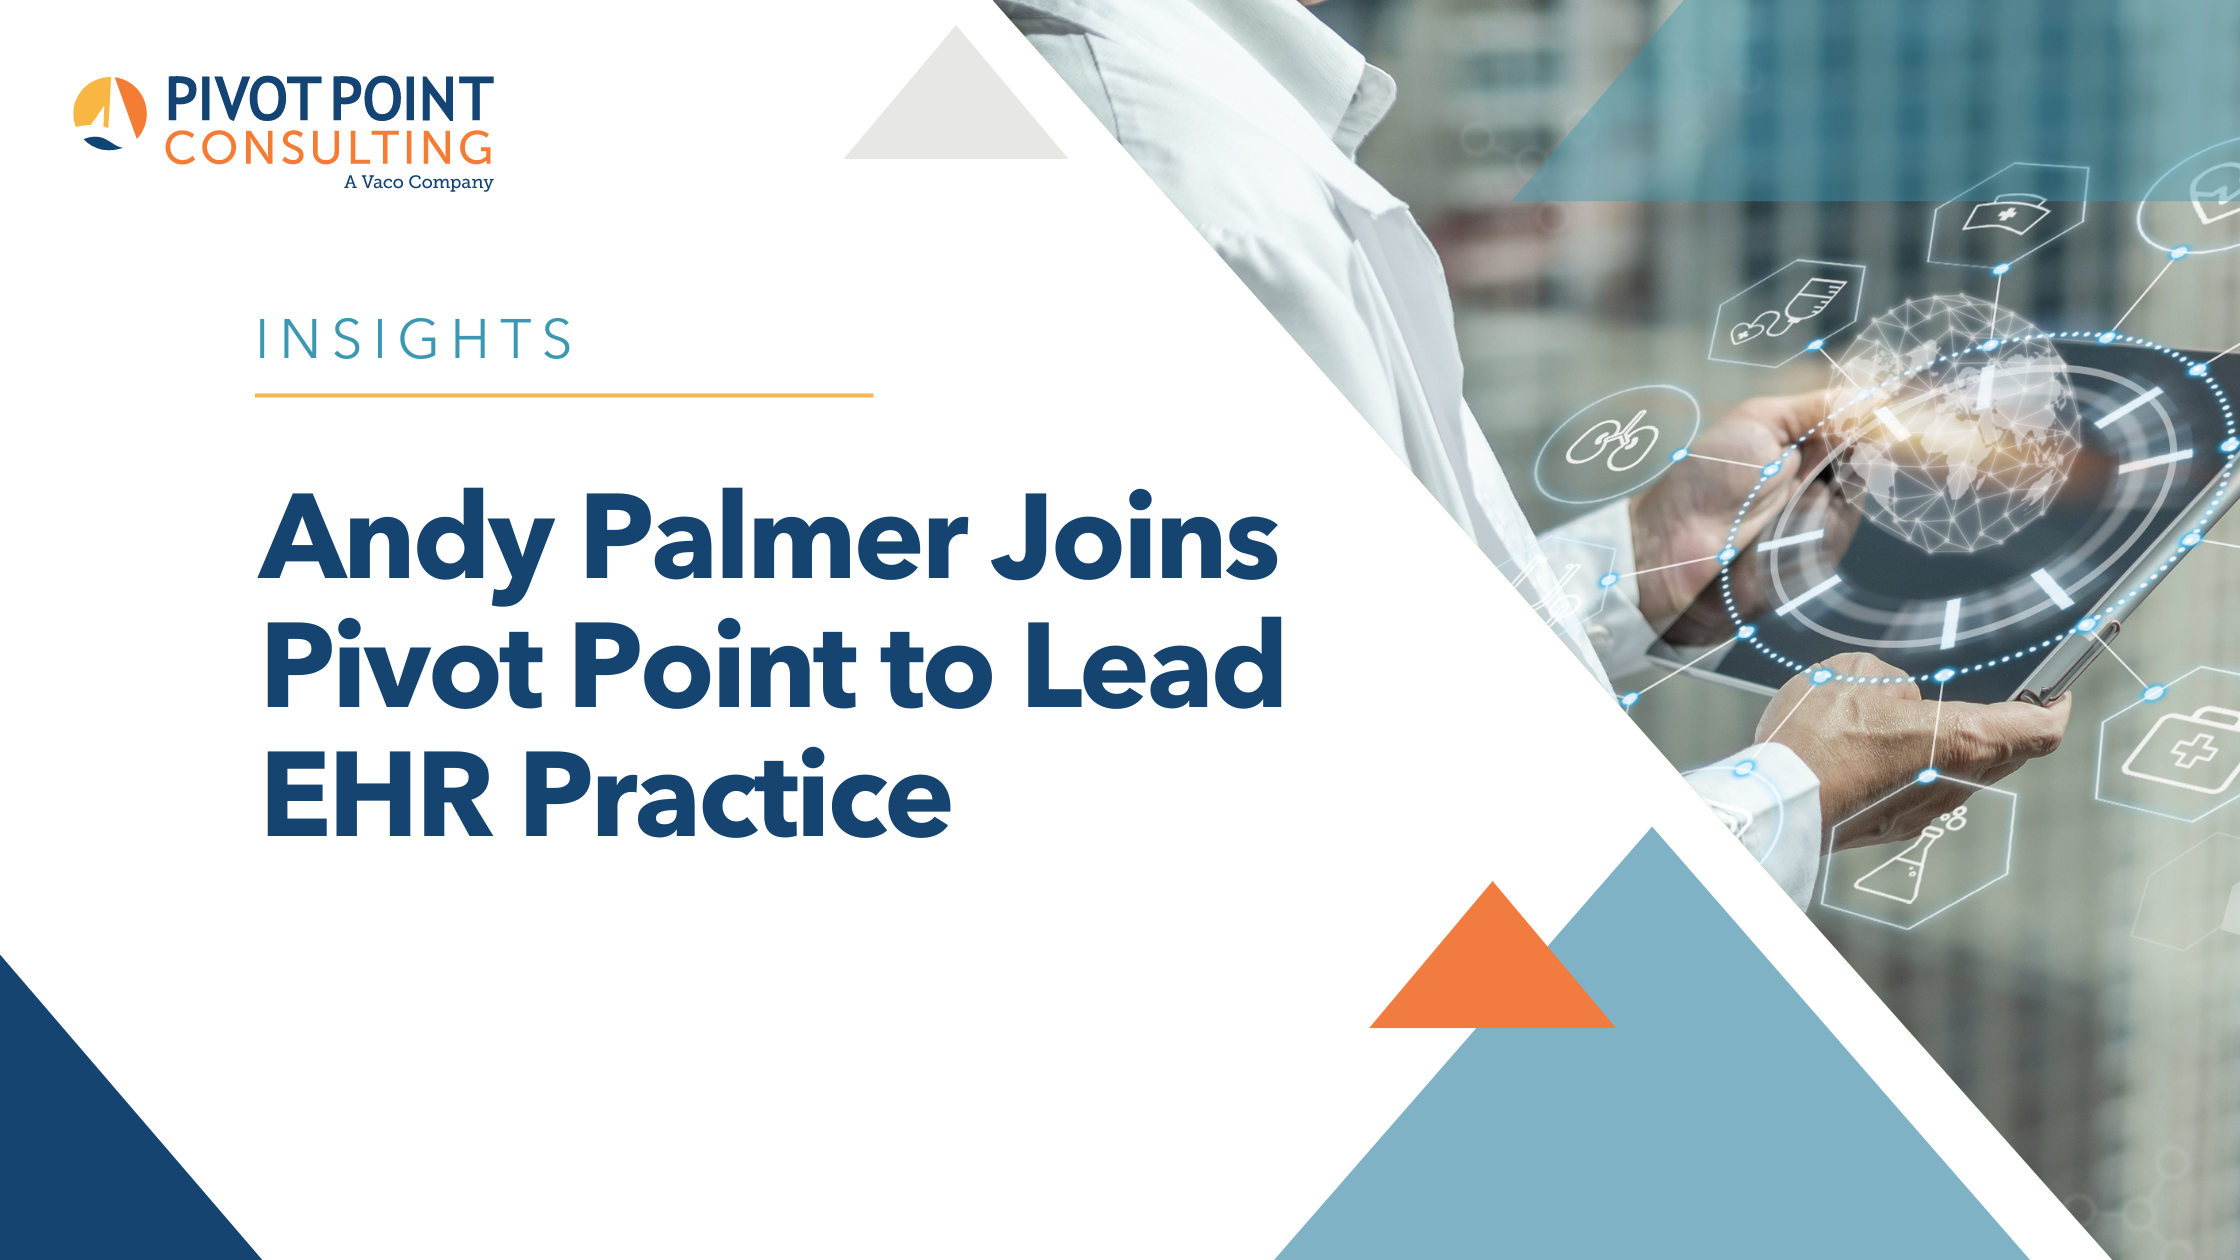 Andy Palmer Joins Pivot Point to Lead EHR Practice blog post